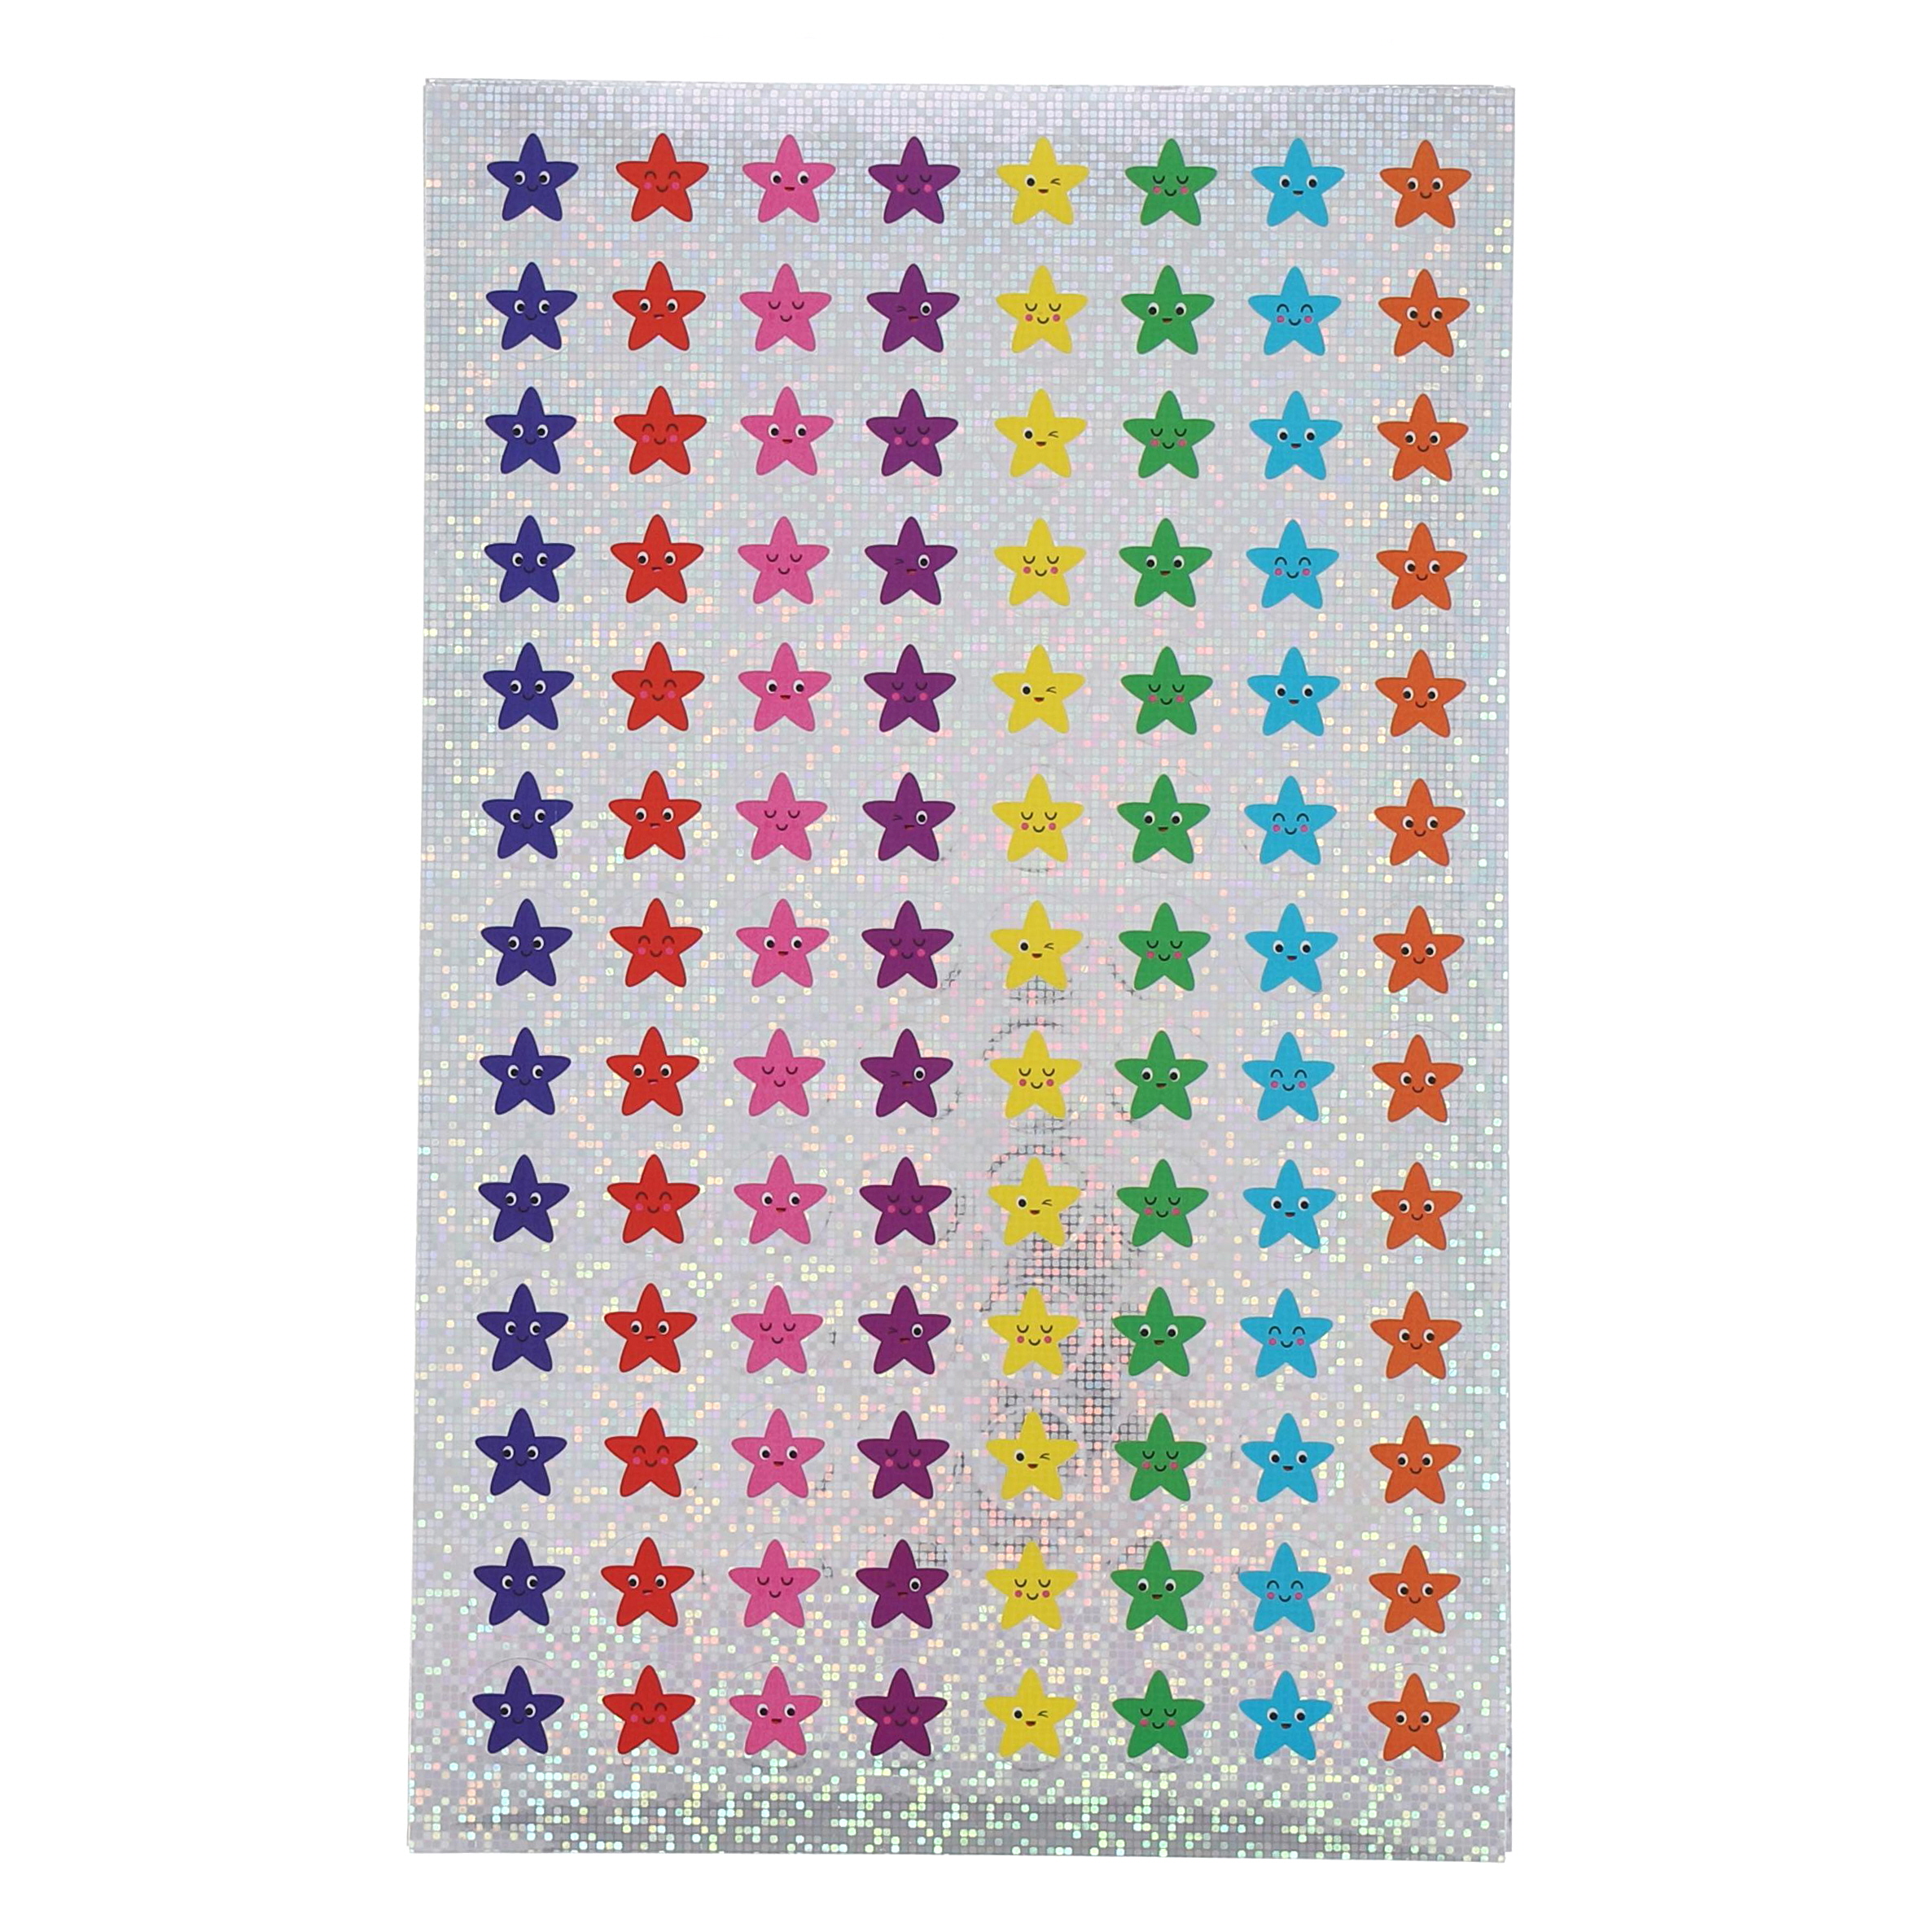 EDMT15112 - Classmates Sparkly Mini Star Stickers - 12mm - Pack of 416